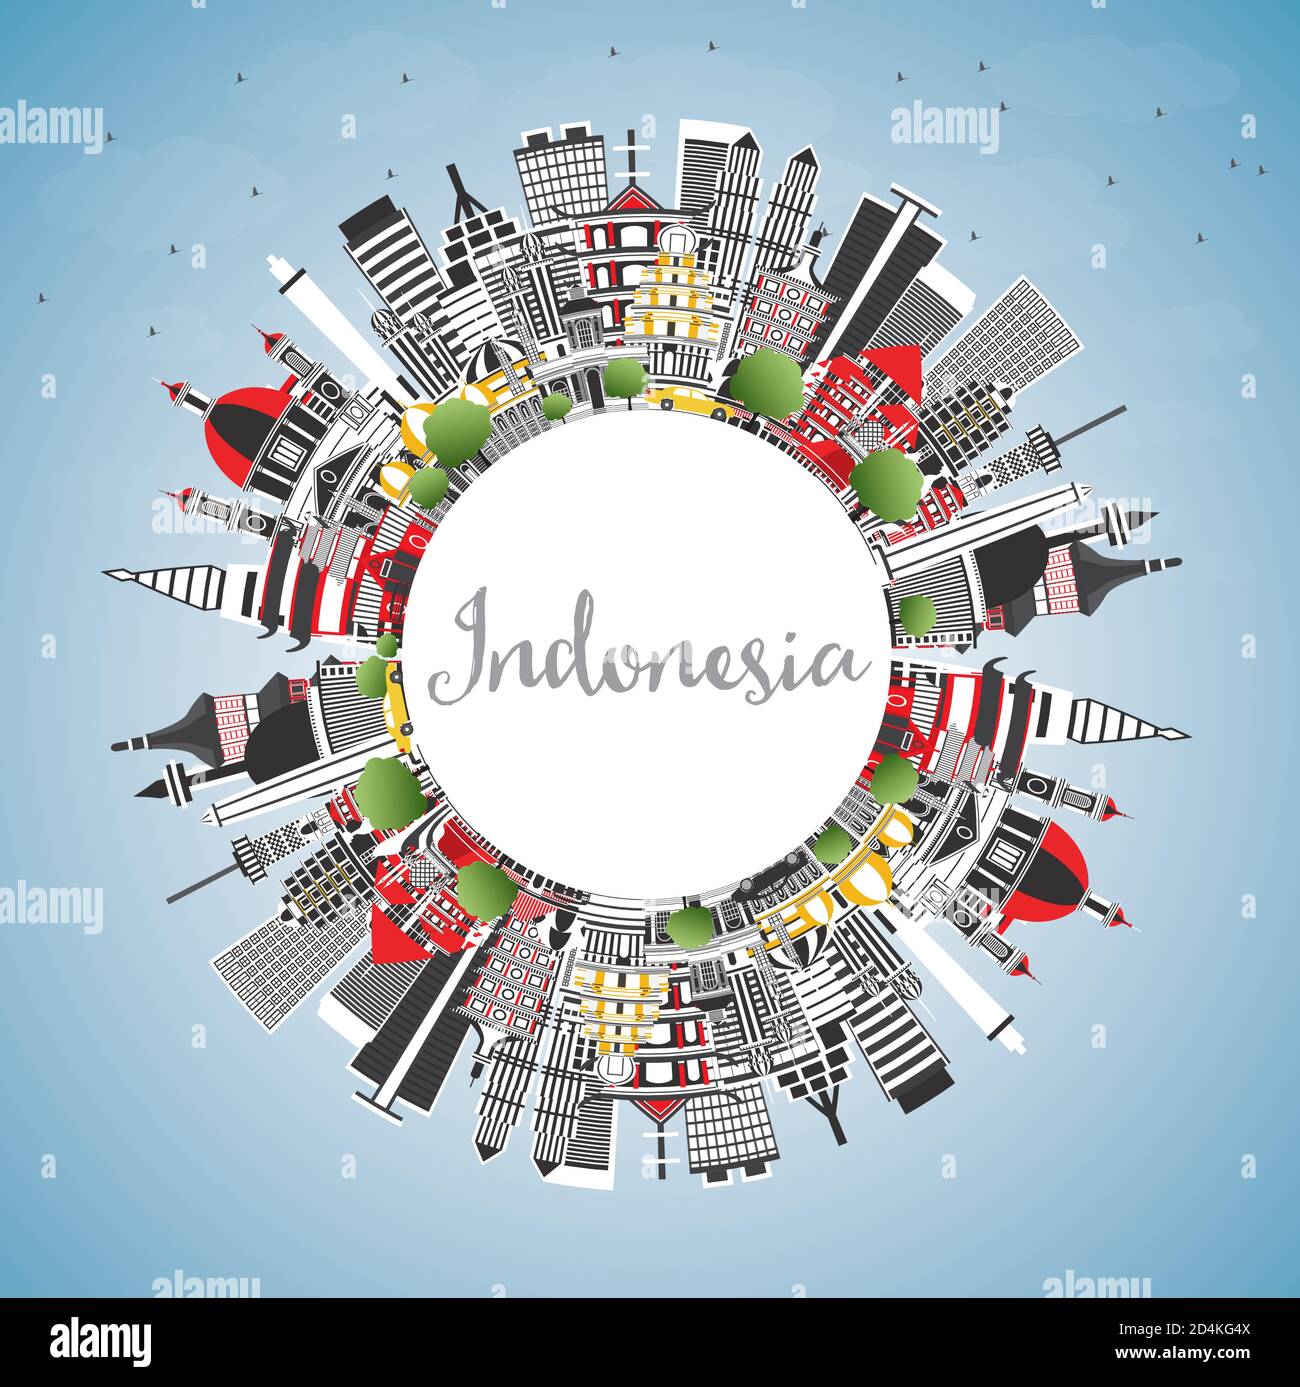 Indonesia Cities Skyline with Gray Buildings, Blue Sky and Copy Space. Vector Illustration. Tourism Concept with Historic Architecture. Stock Vector